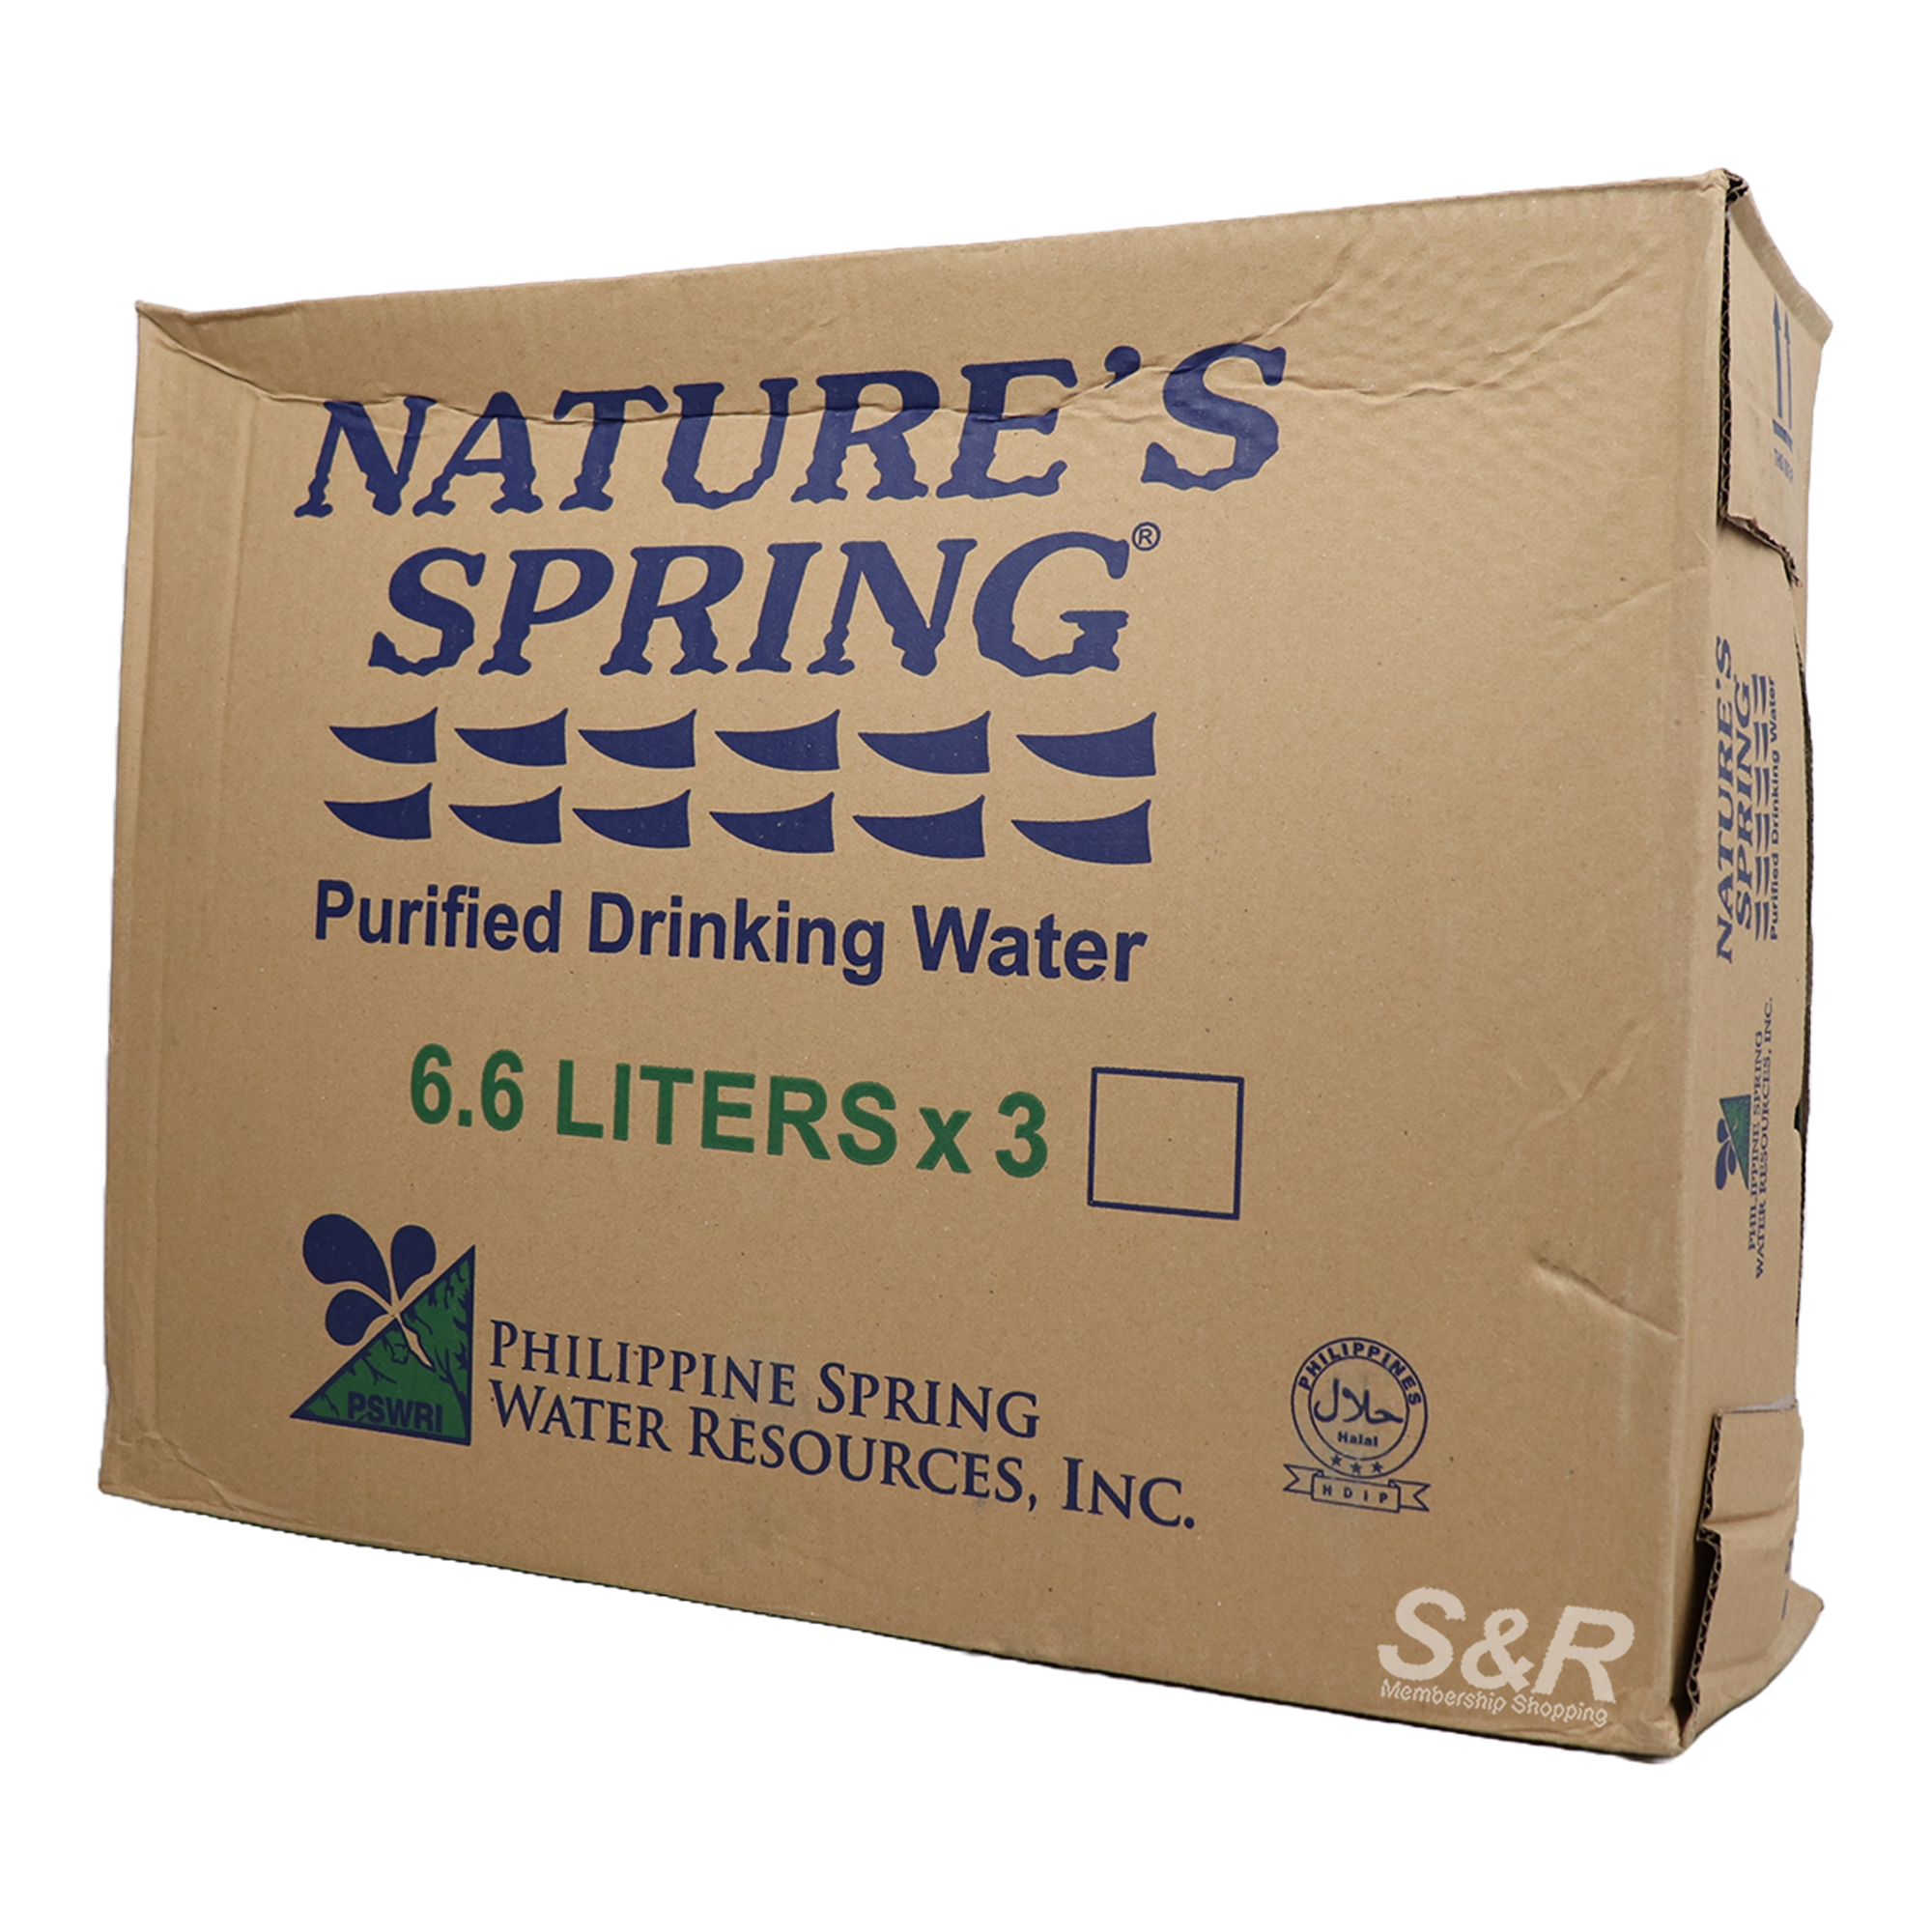 Nature's Spring Purified Drinking Water 3pcs x 6.6L